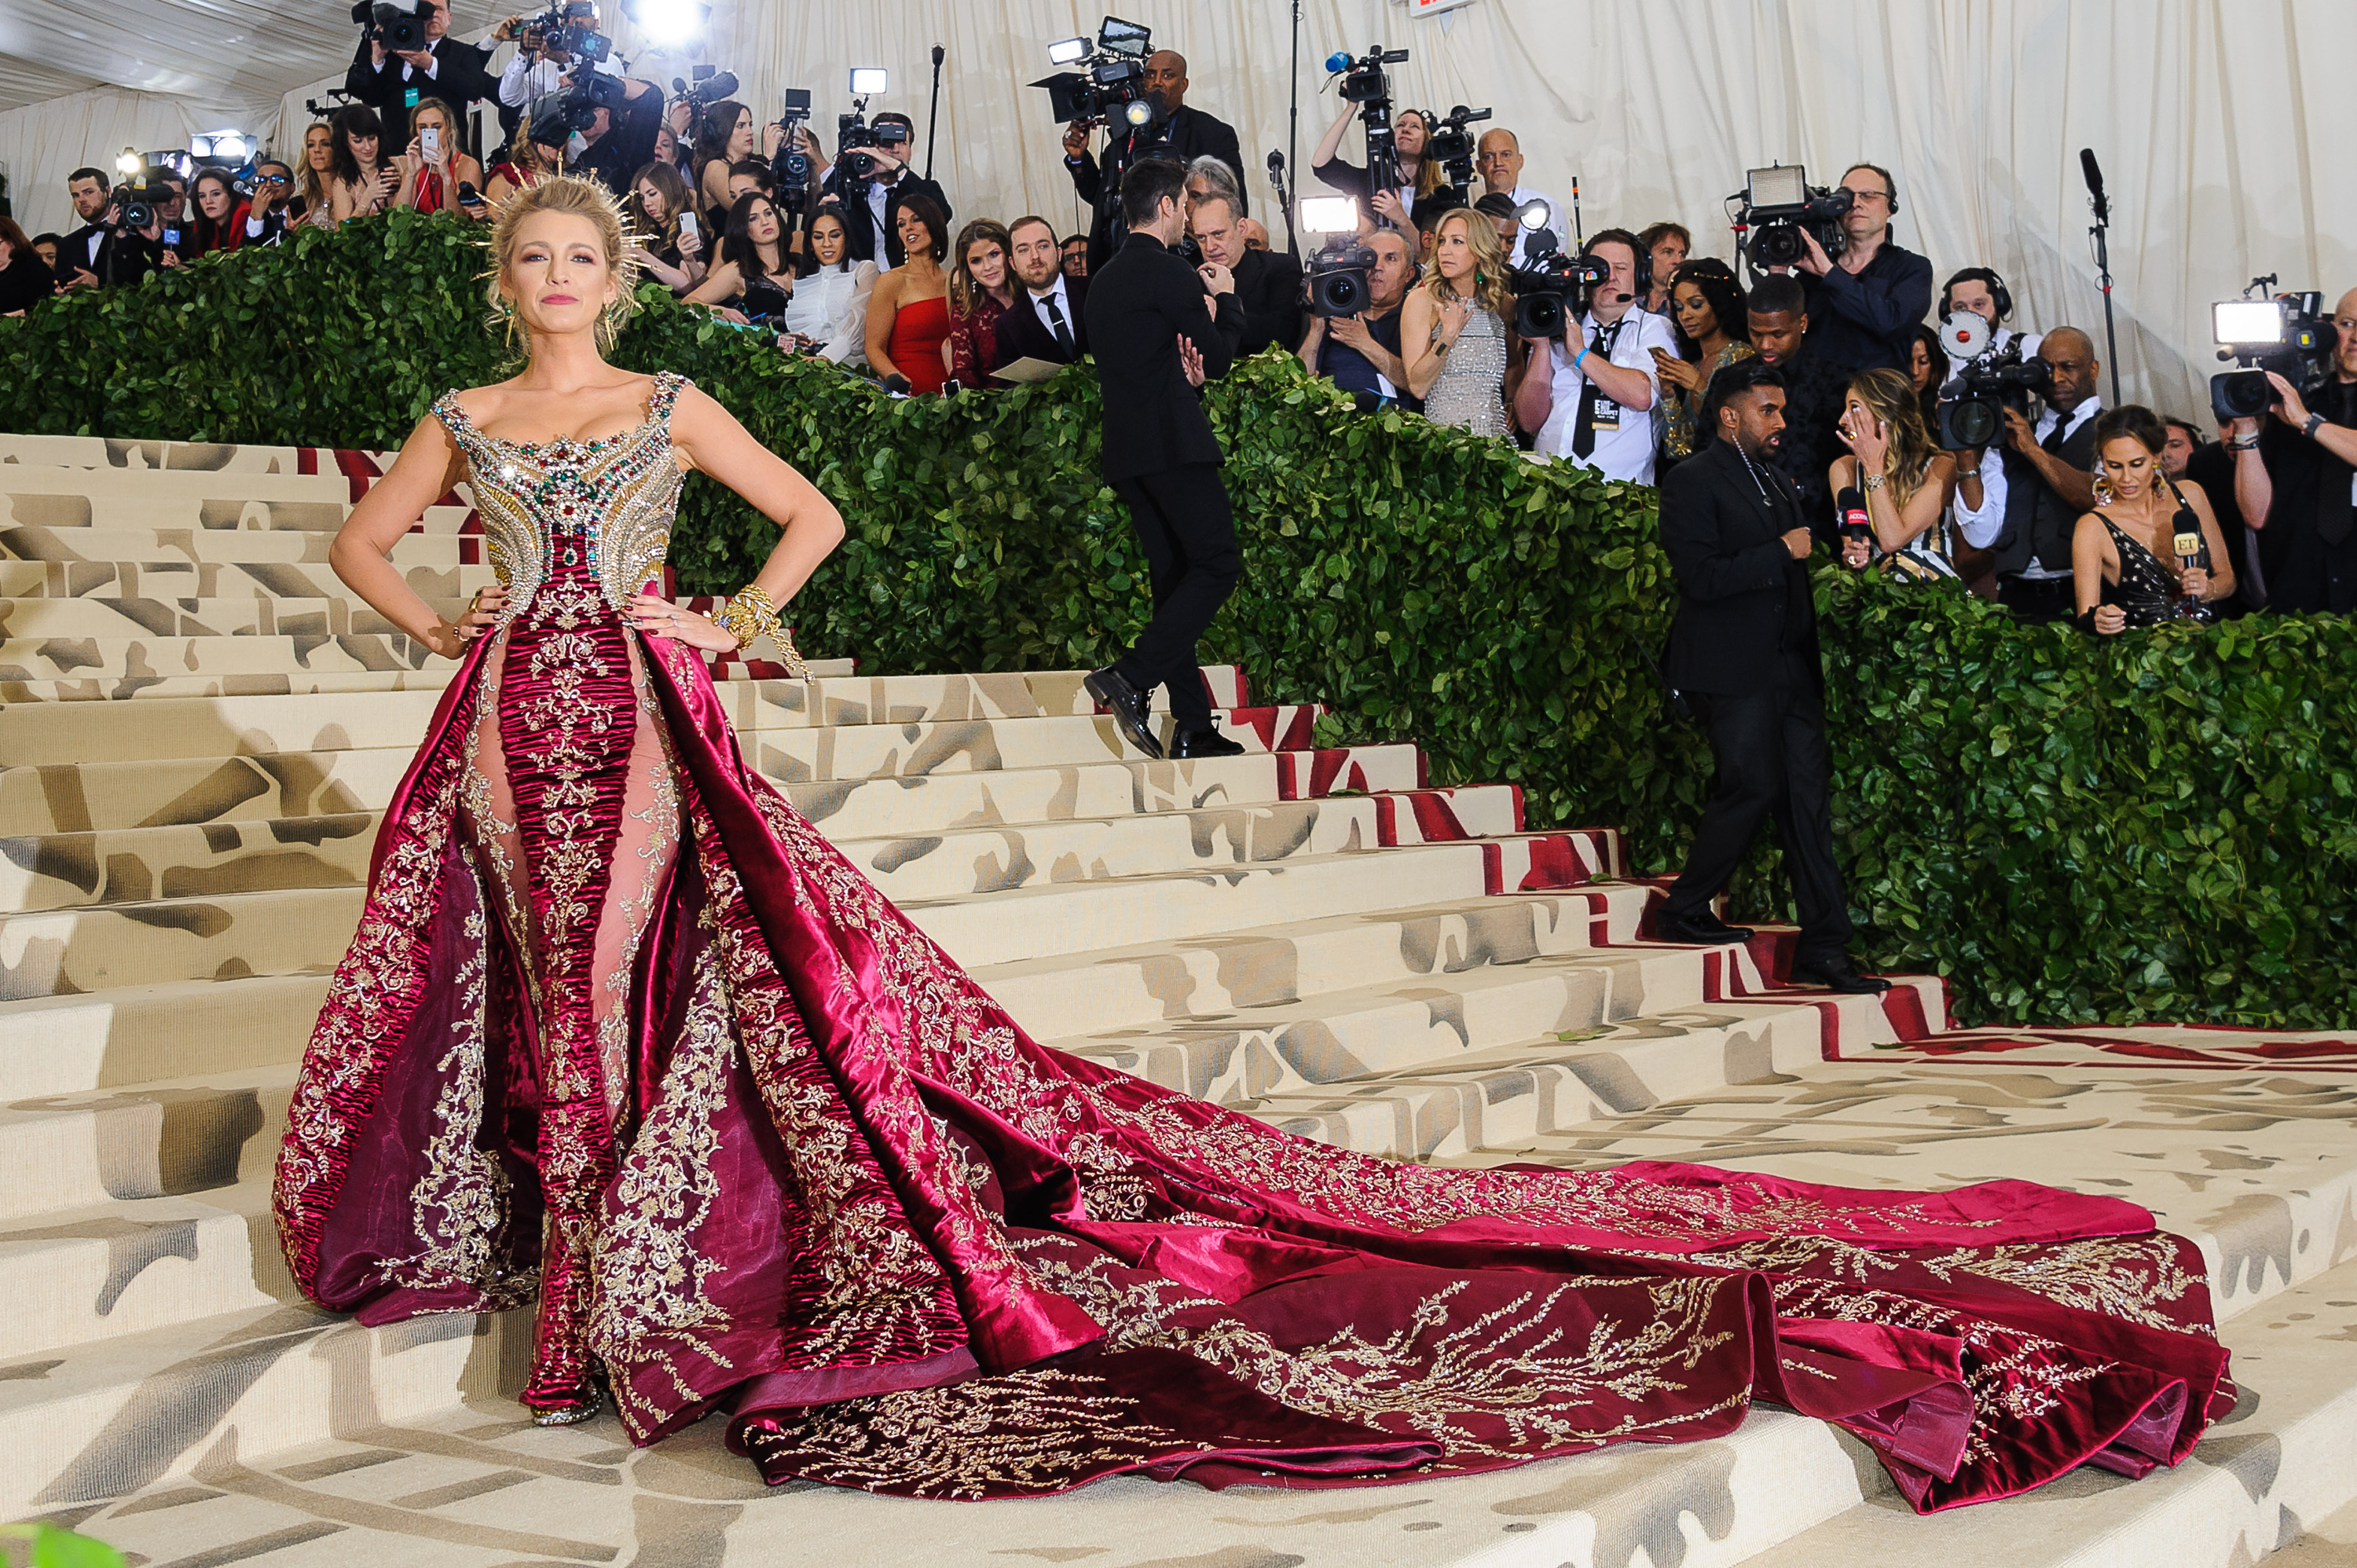 Fashion red carpet finery from Karl Lagerfeld's Met Gala